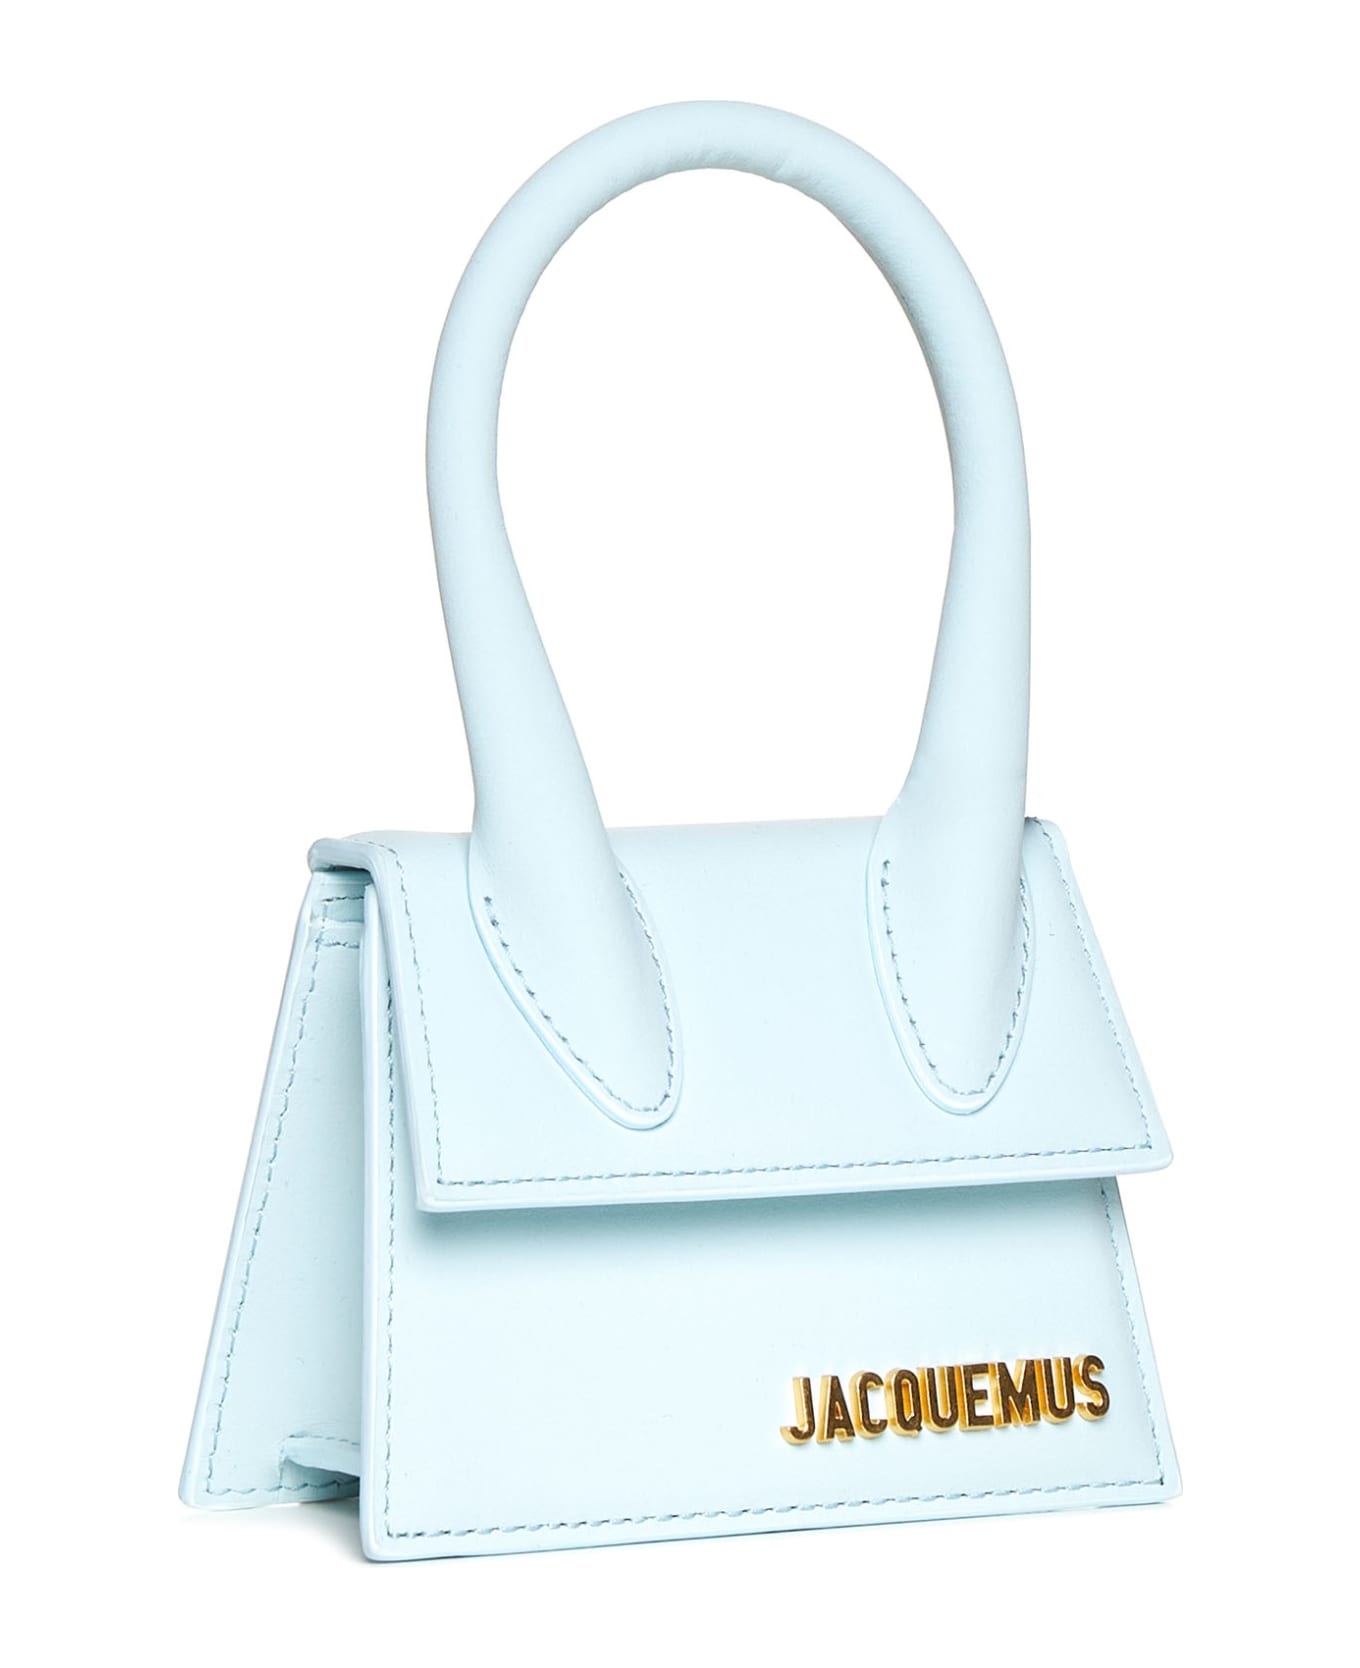 Jacquemus Tote - Pale blue トートバッグ